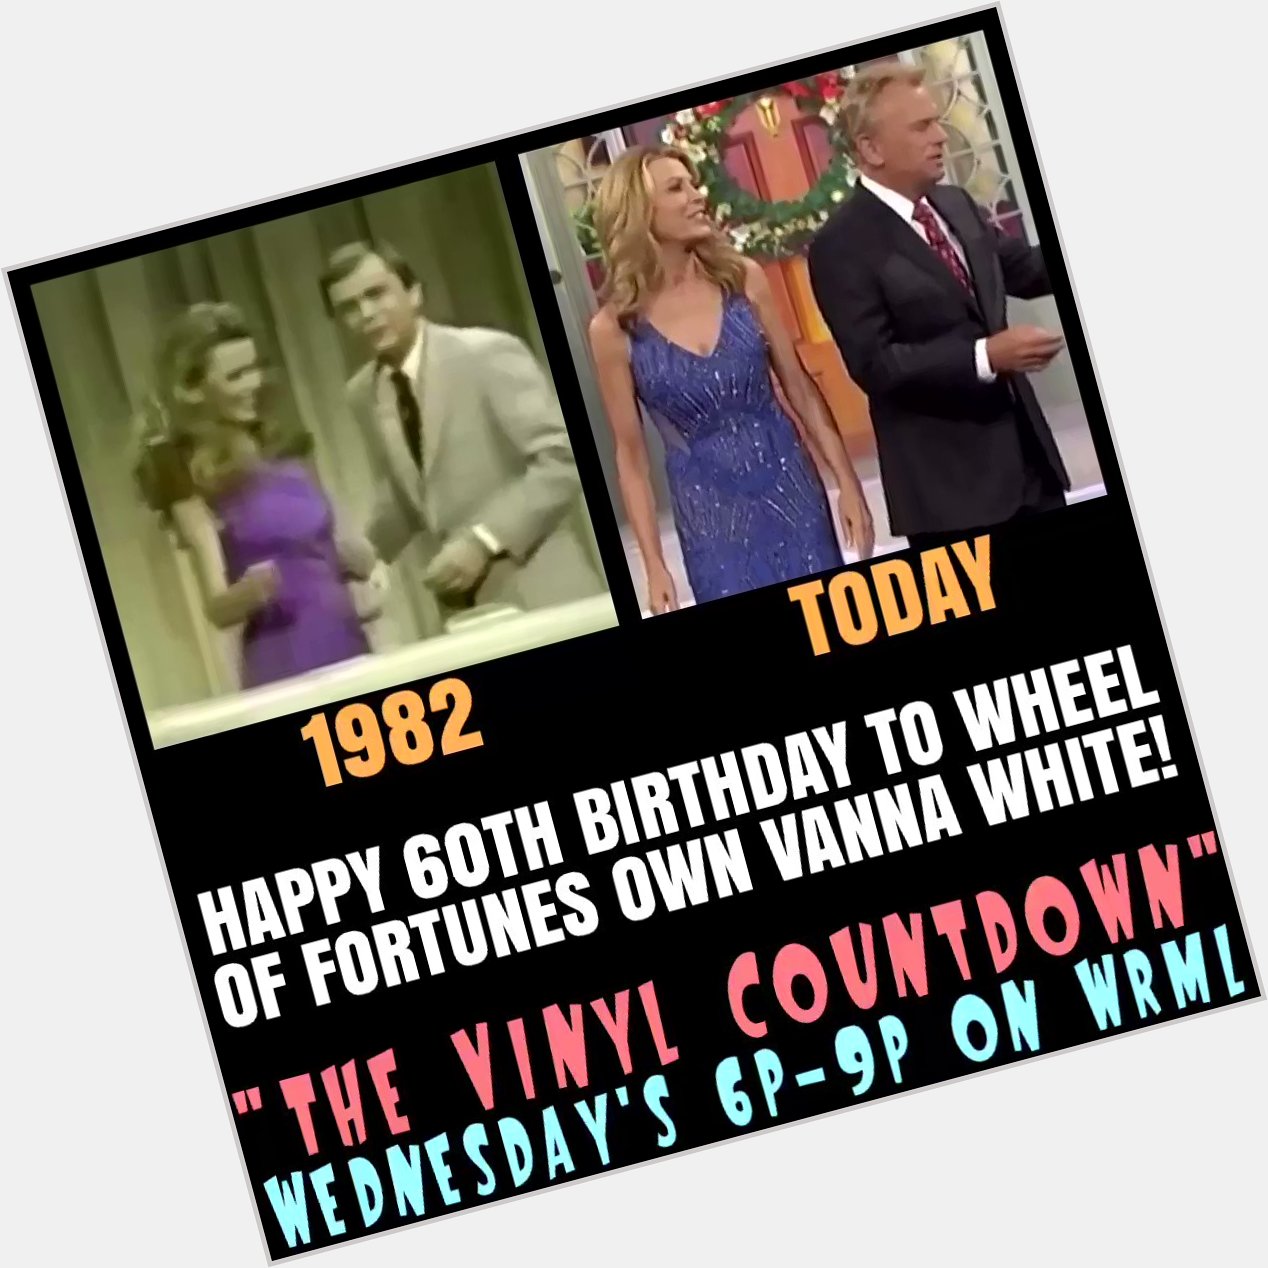 She still looks amazing after all these years on Wheel Of Fortune, doesn\t she? Happy 60th Birthday to Vanna White! 